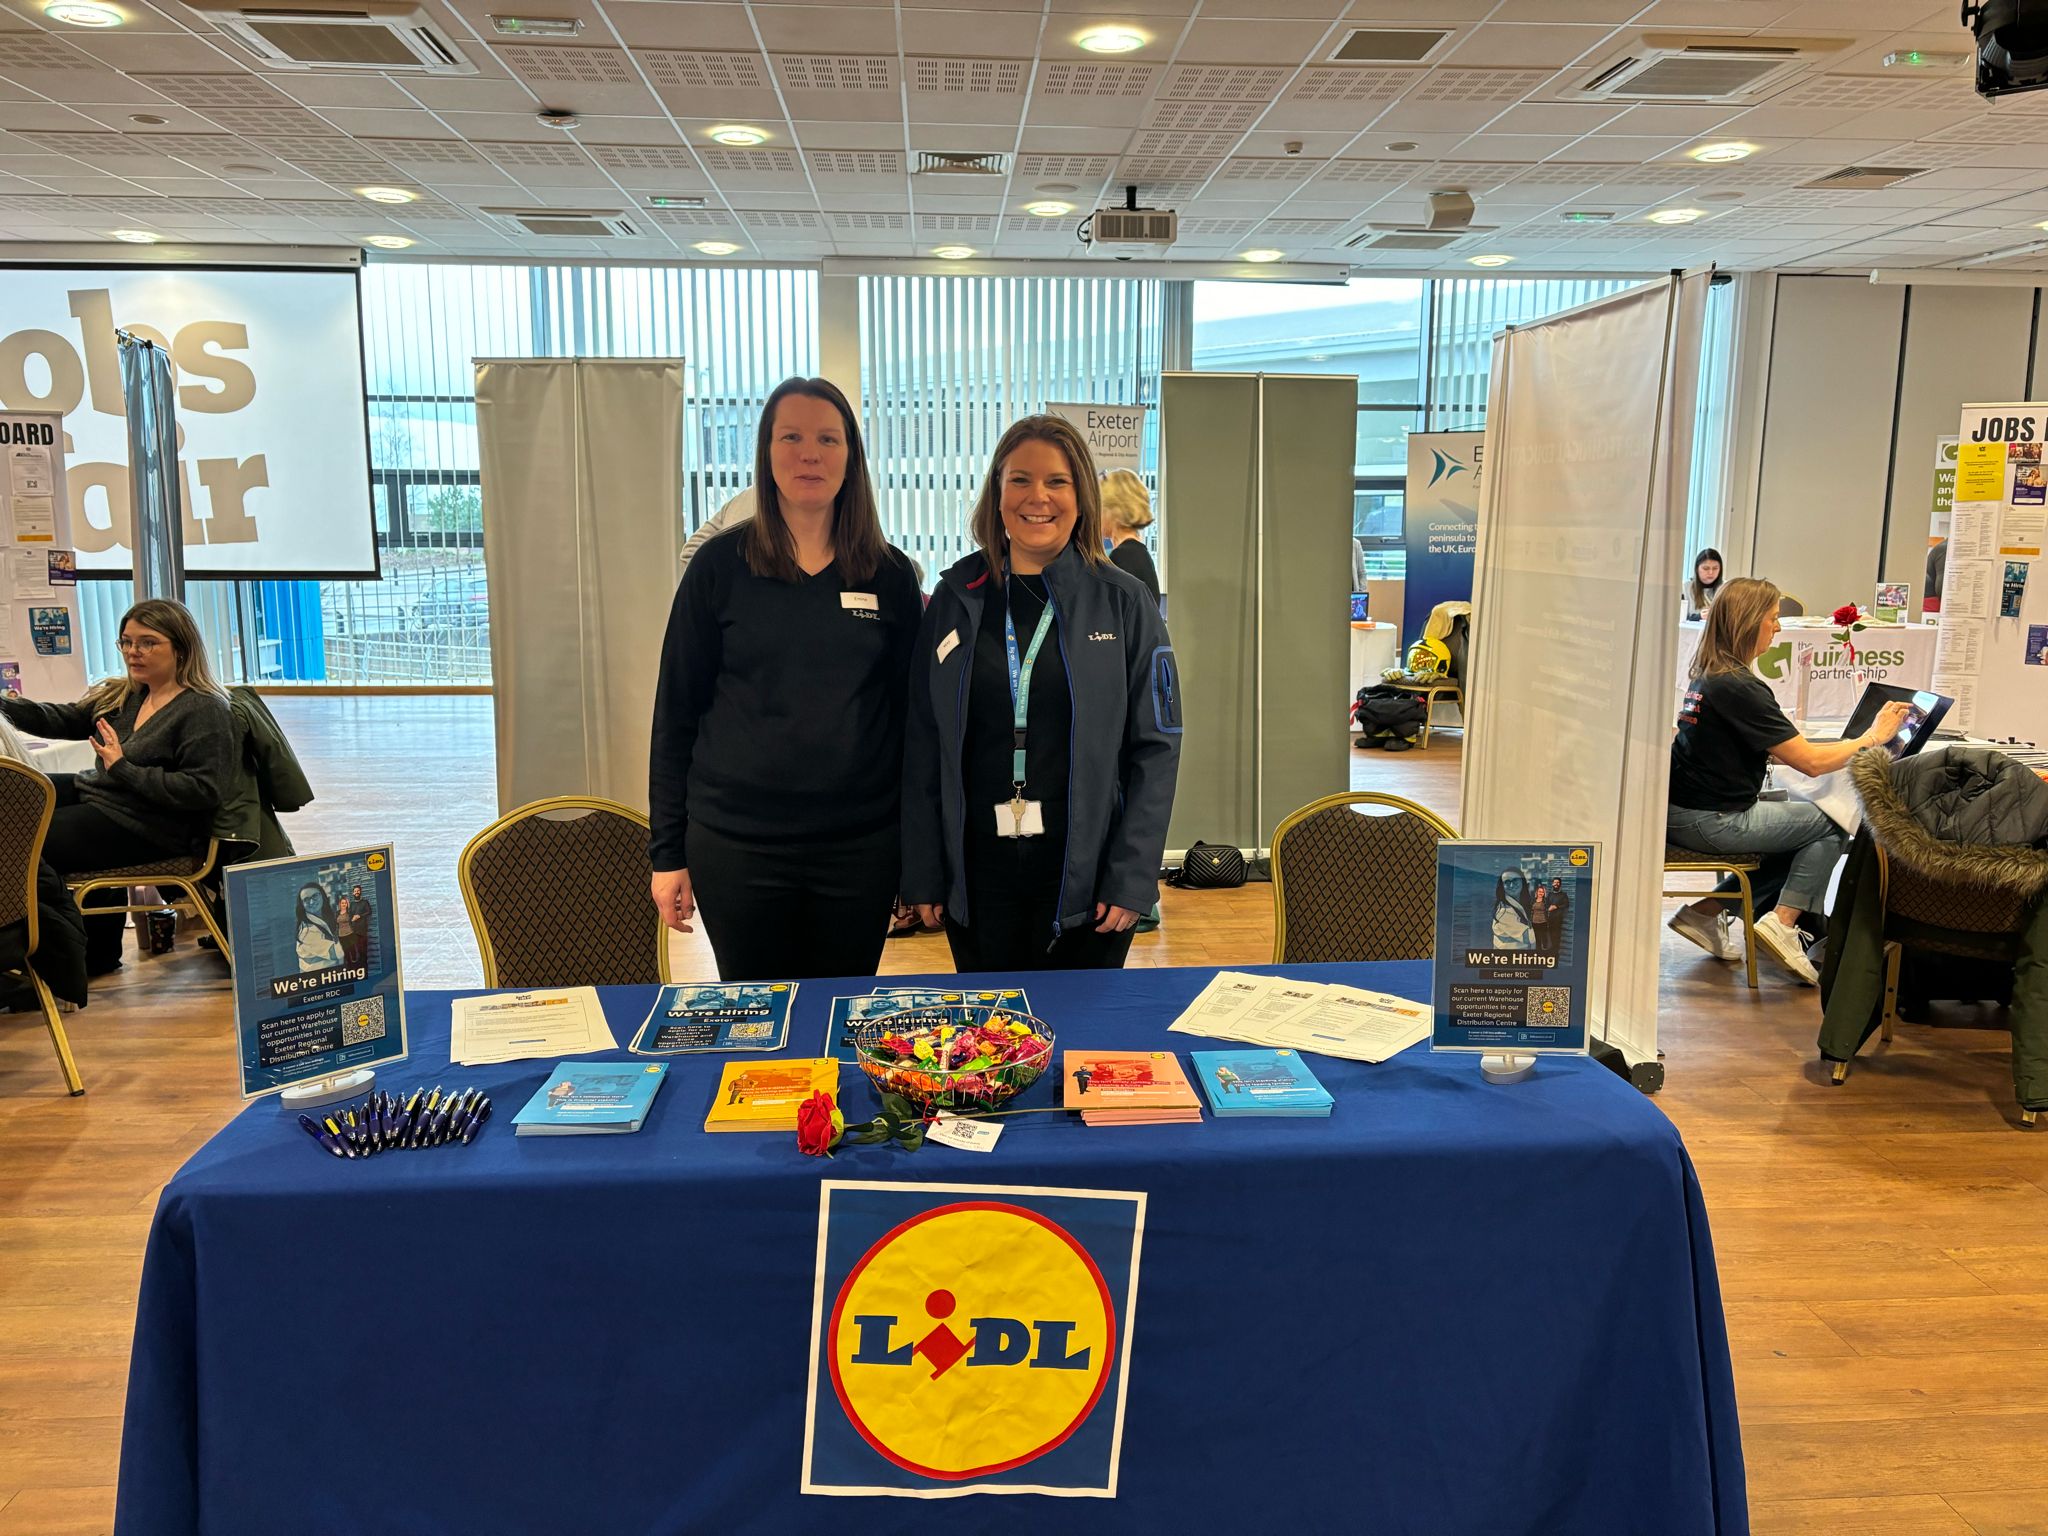 Lidl at our event in Exeter